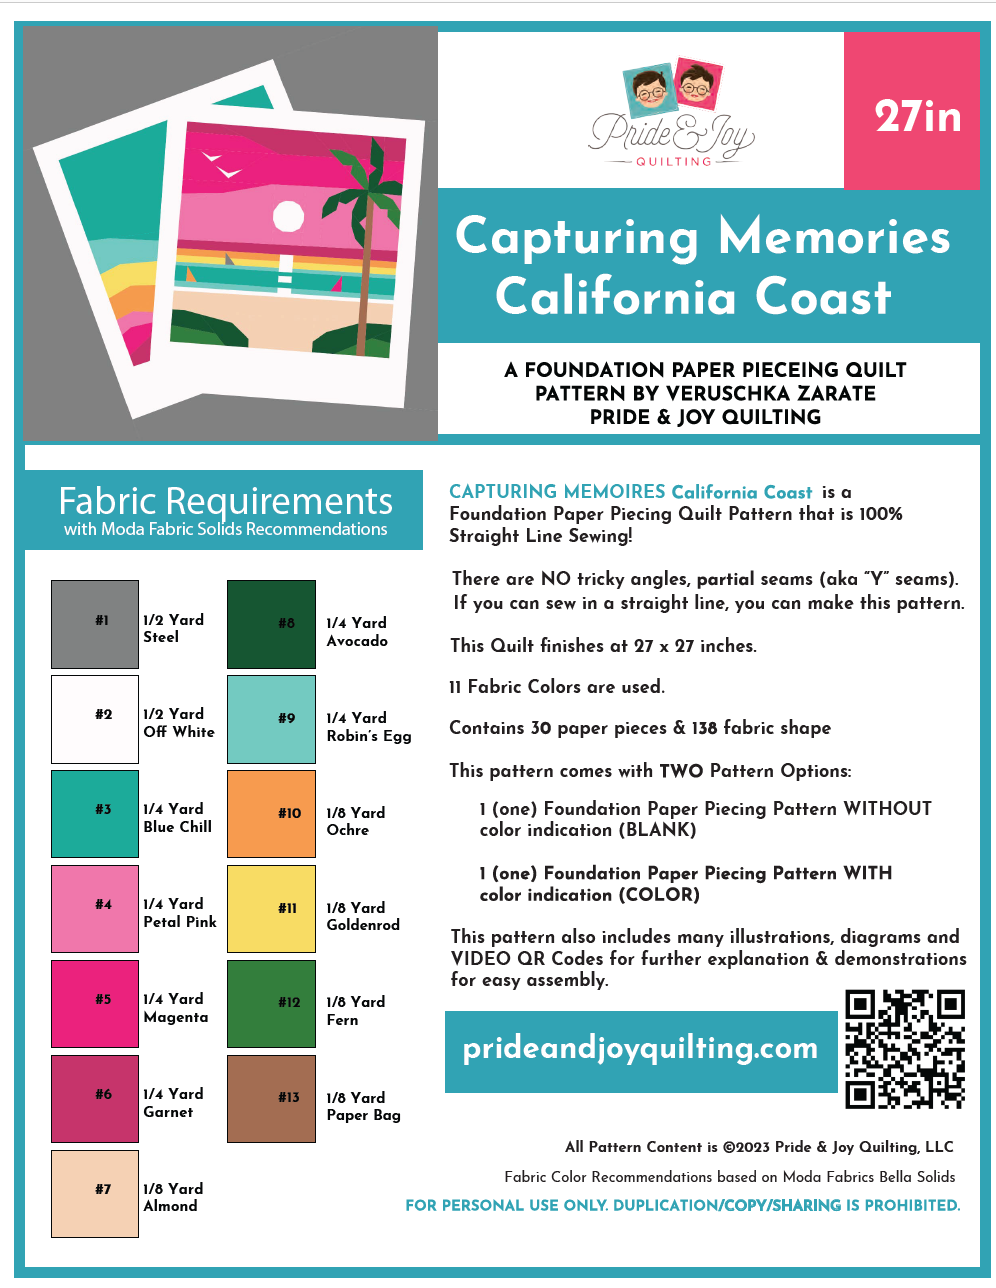 PDF (Part 3 of 9) Capturing Memories CALIFORNIA COAST. A Foundation Paper Piecing Quilt Pattern Series